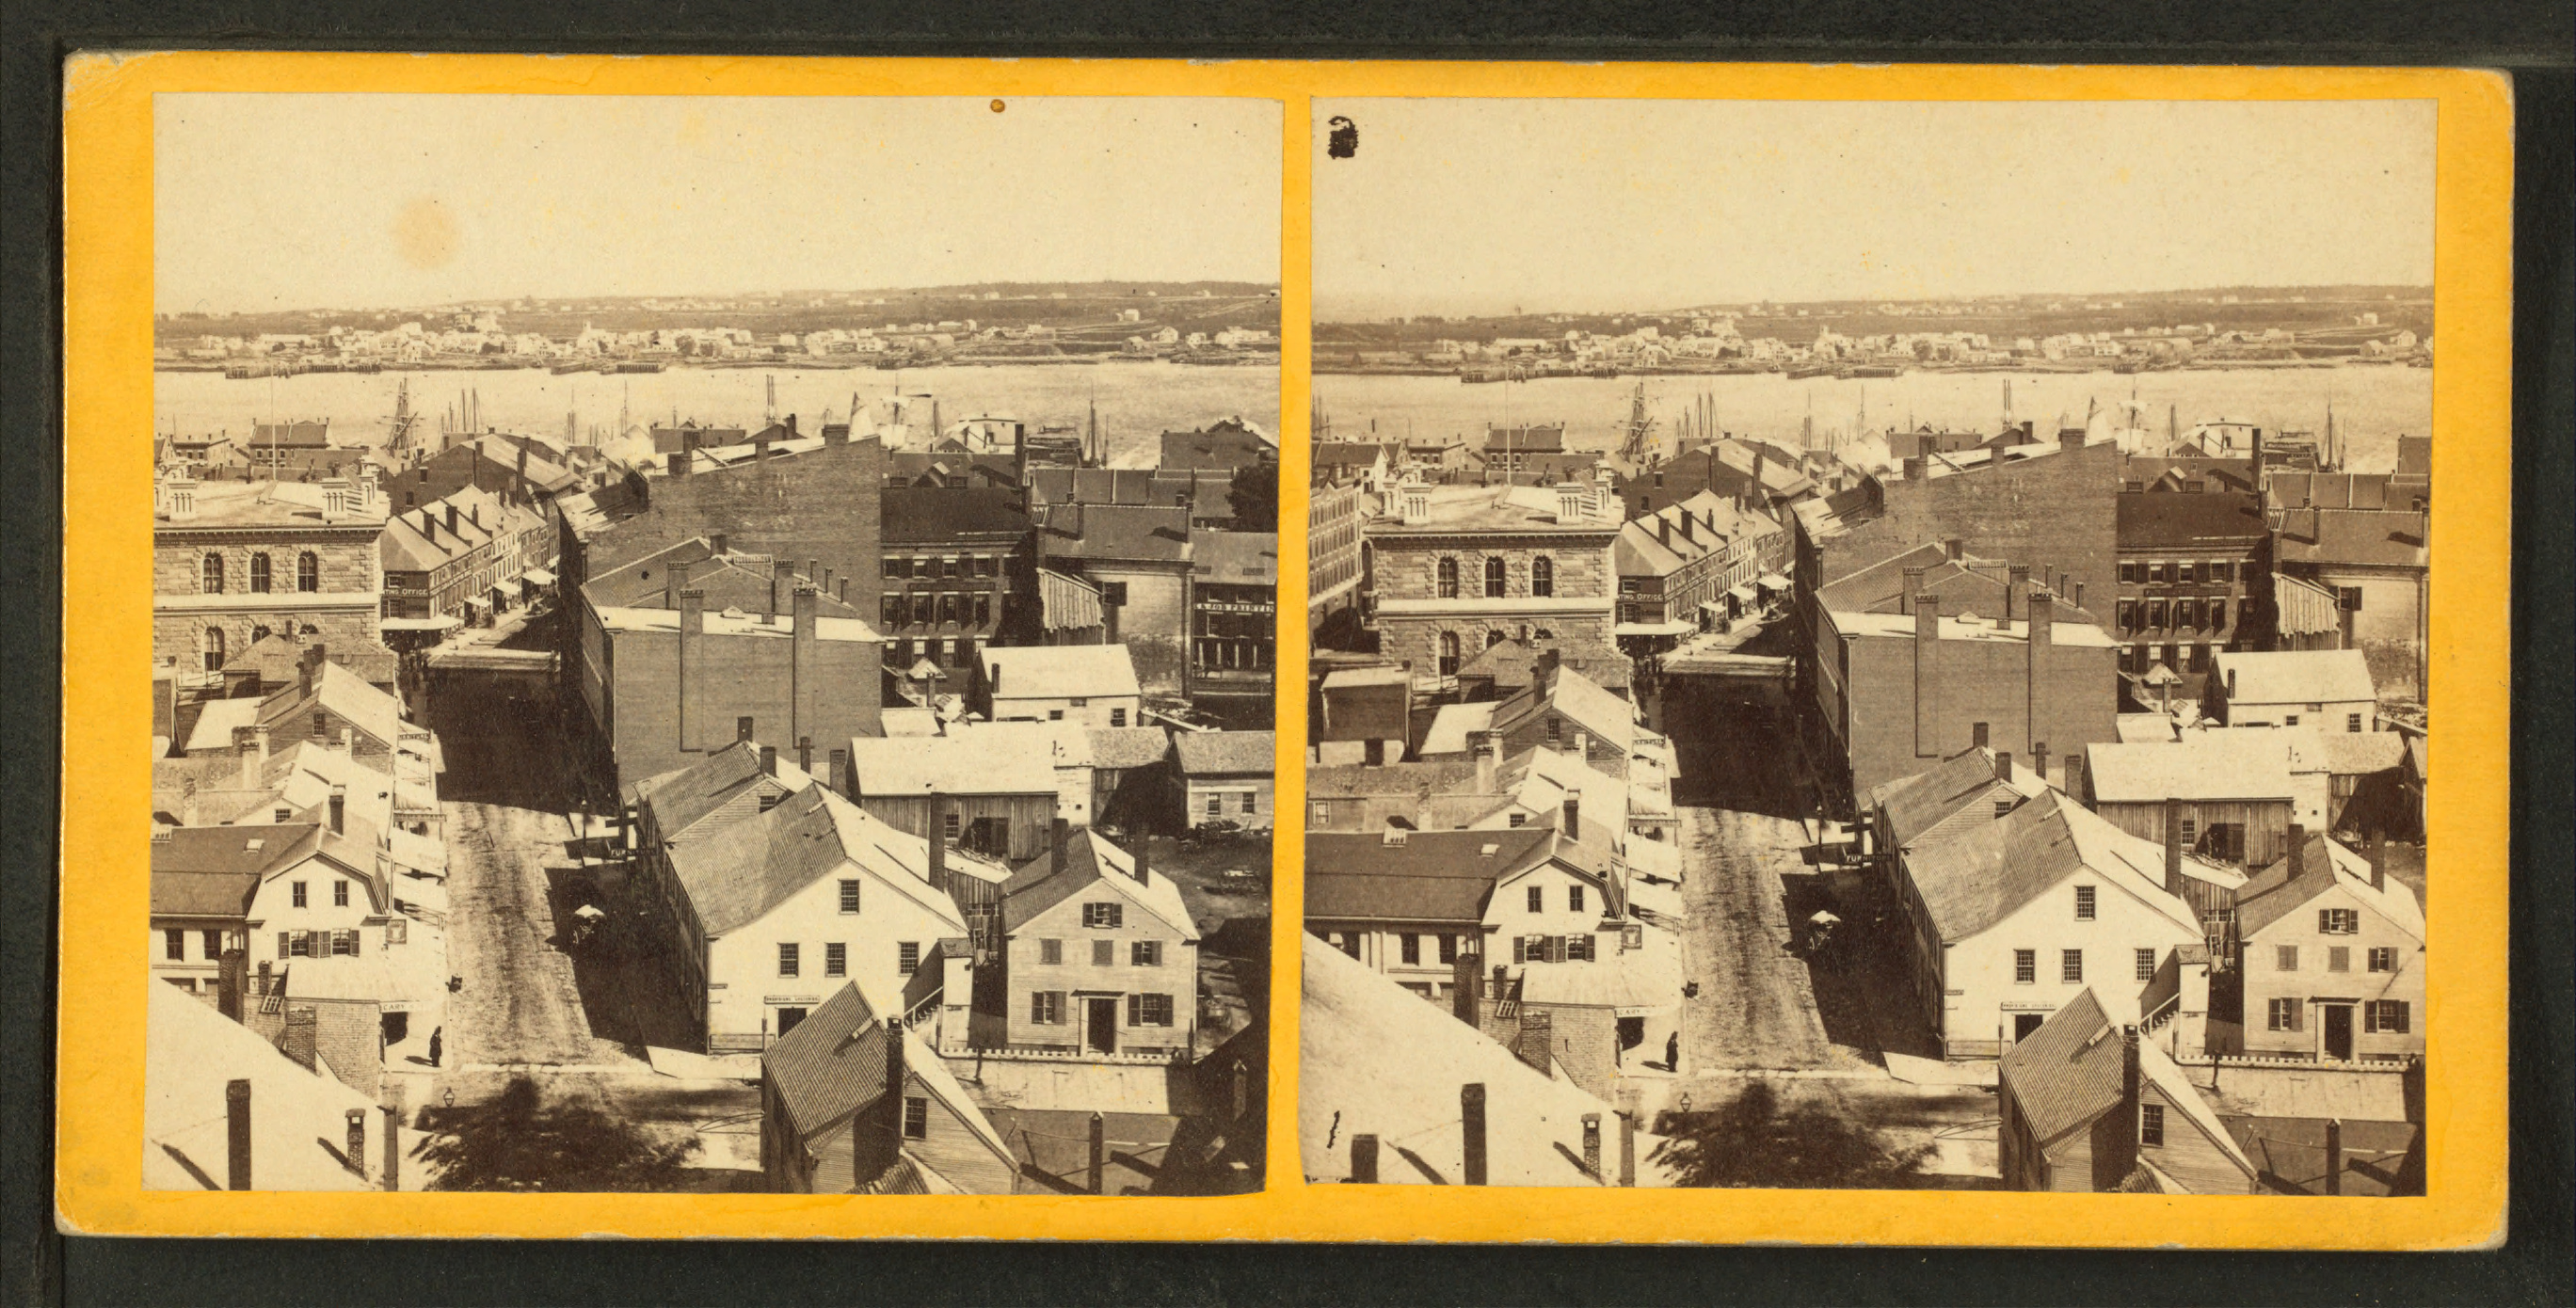 View of Portland, Maine, from Robert N. Dennis collection of stereoscopic views